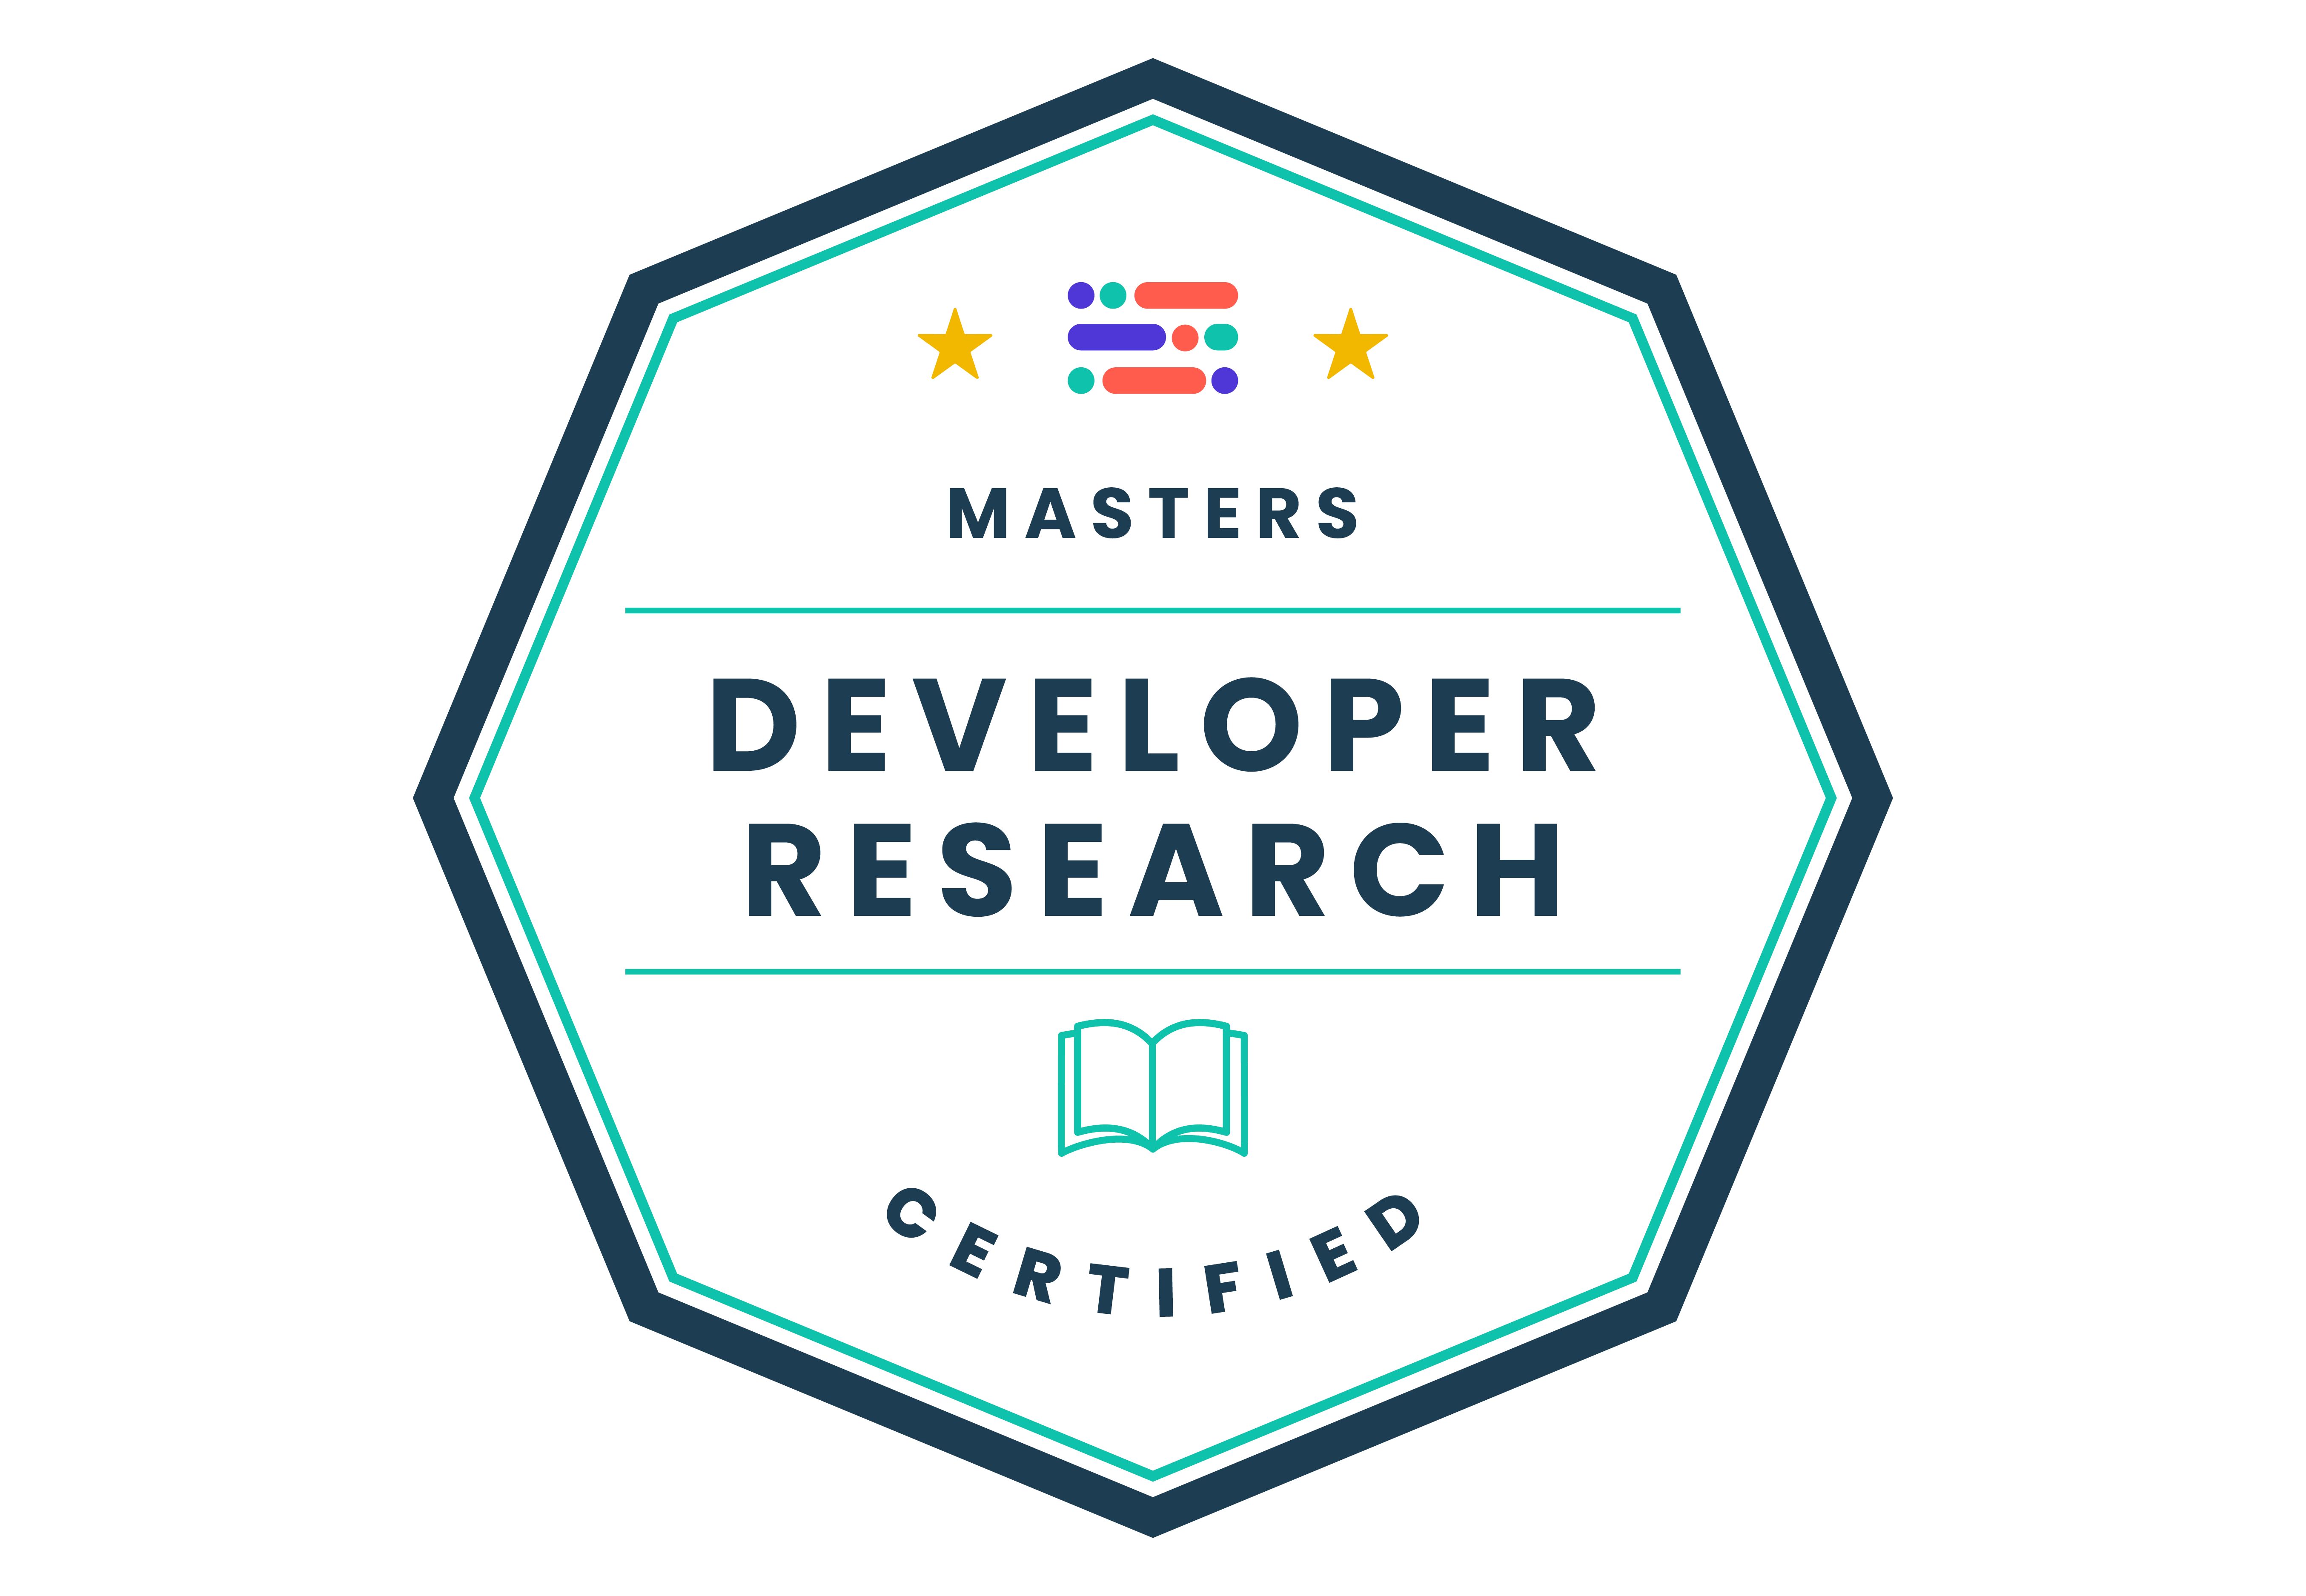 Developer Research Certified | Masters badge